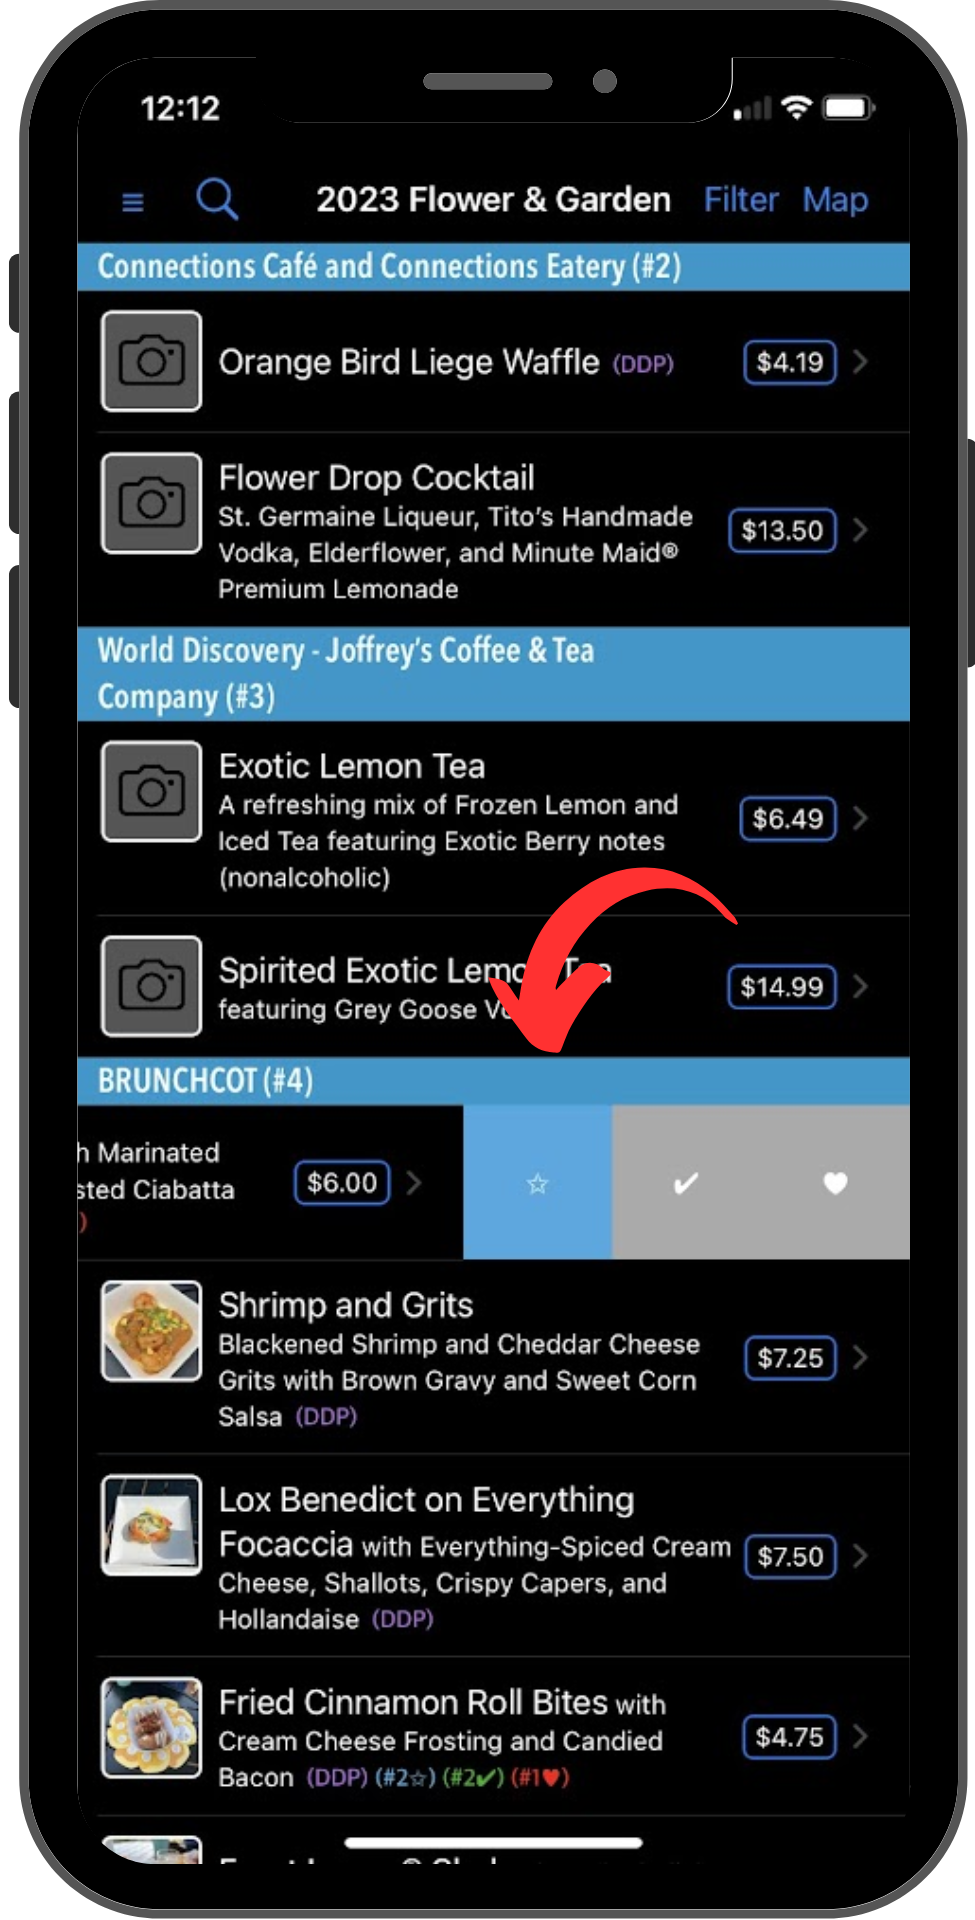 The tile for a dish has been swiped left, and the same display shows three icons. This time, the background of the star icon is blue, showing that it has been selected.